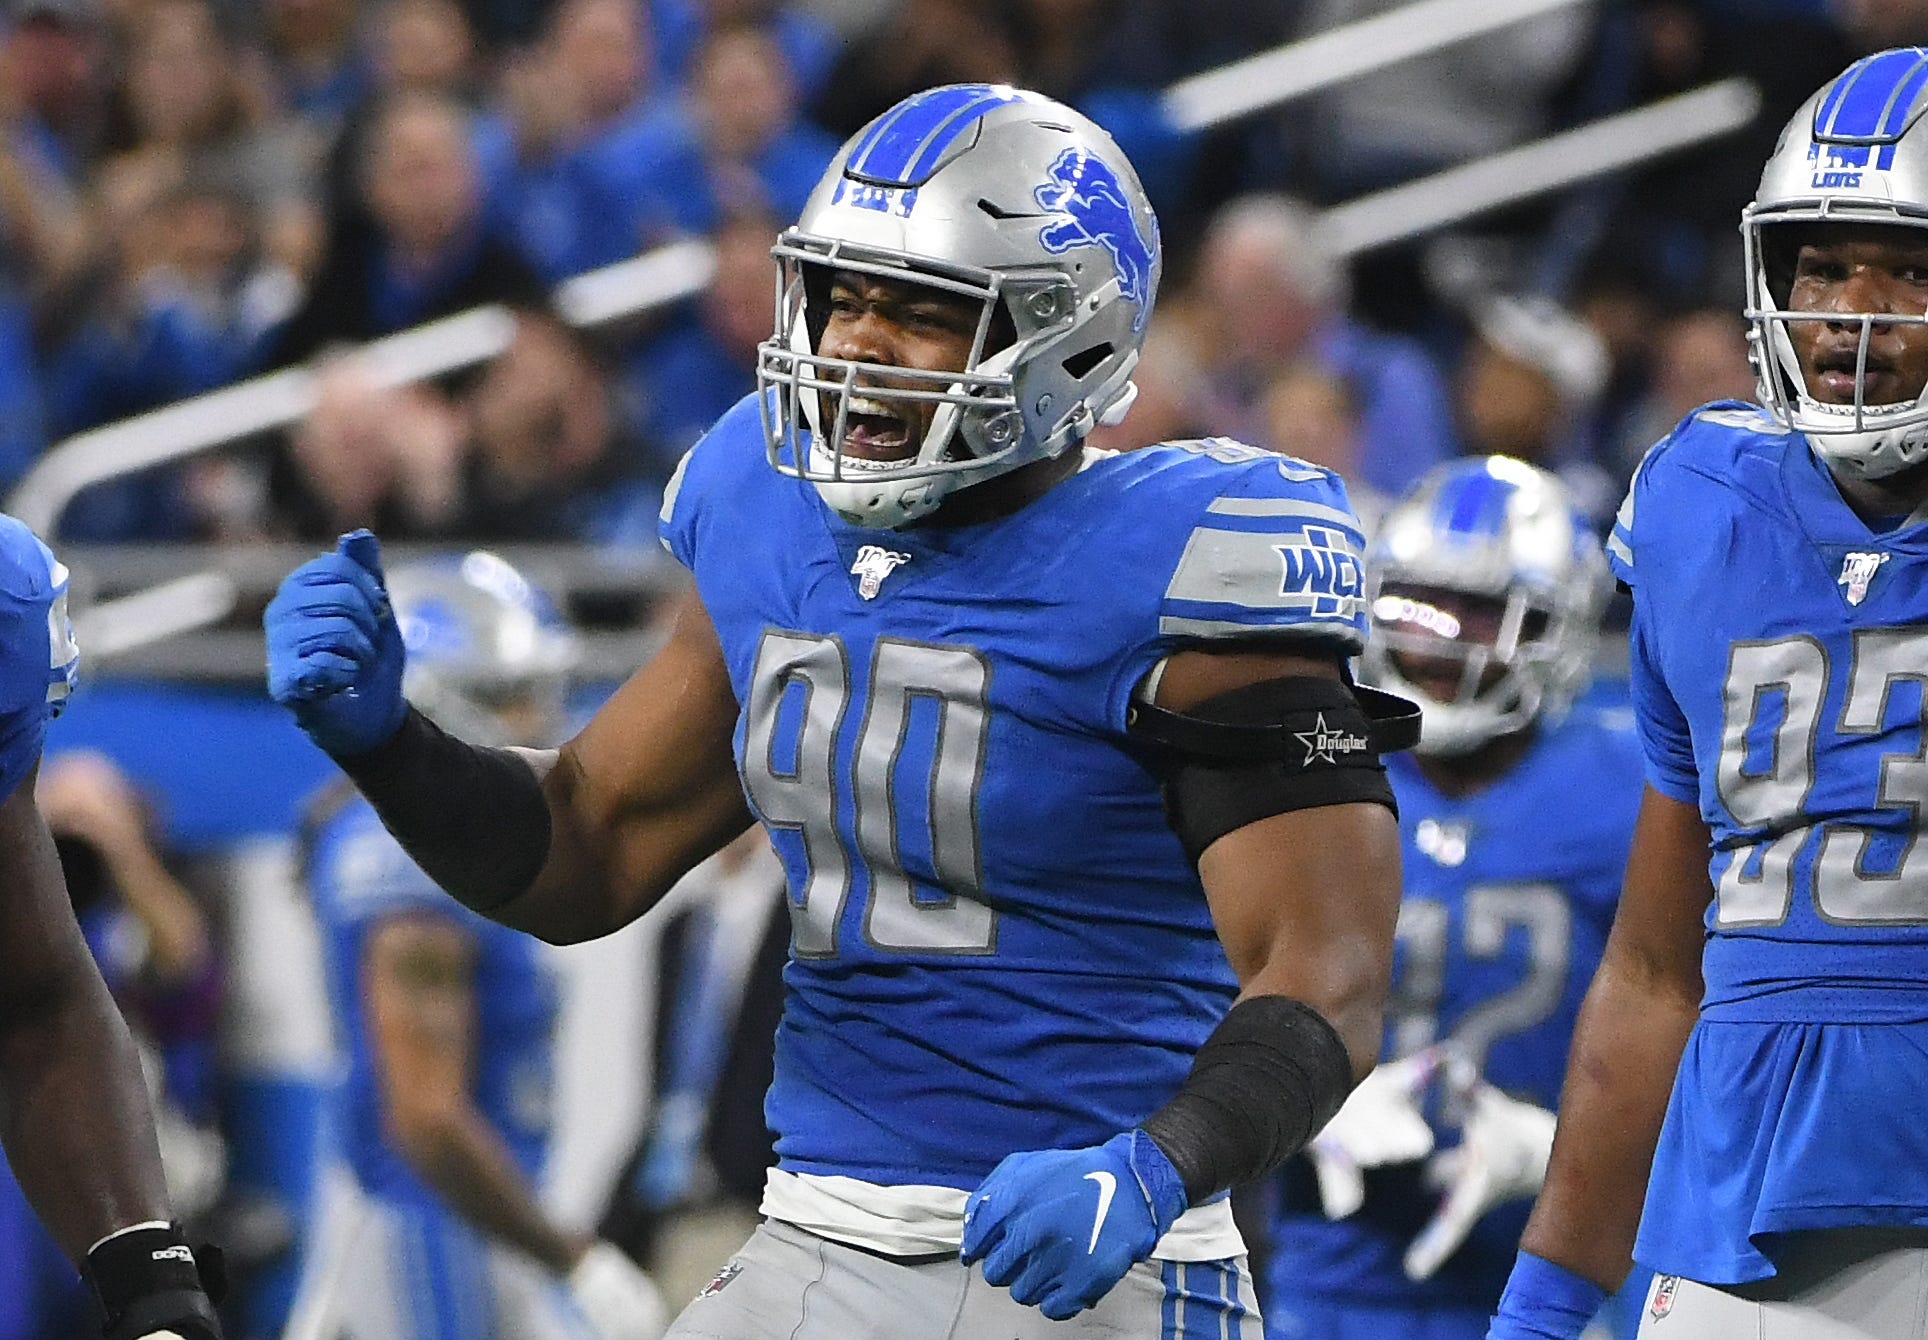 DEFENSE: Trey Flowers, defensive end: Flowers got off to a sluggish start as he struggled to shake off the rust from an offseason shoulder surgery. But once he got past those mental and physical hurdles, he provided the Lions exactly what they anticipated when they signed him in free agency. He finished with seven sacks, in line with career production, and was top-12 in quarterback pressures and hits from Weeks 3-17. Grade: B+